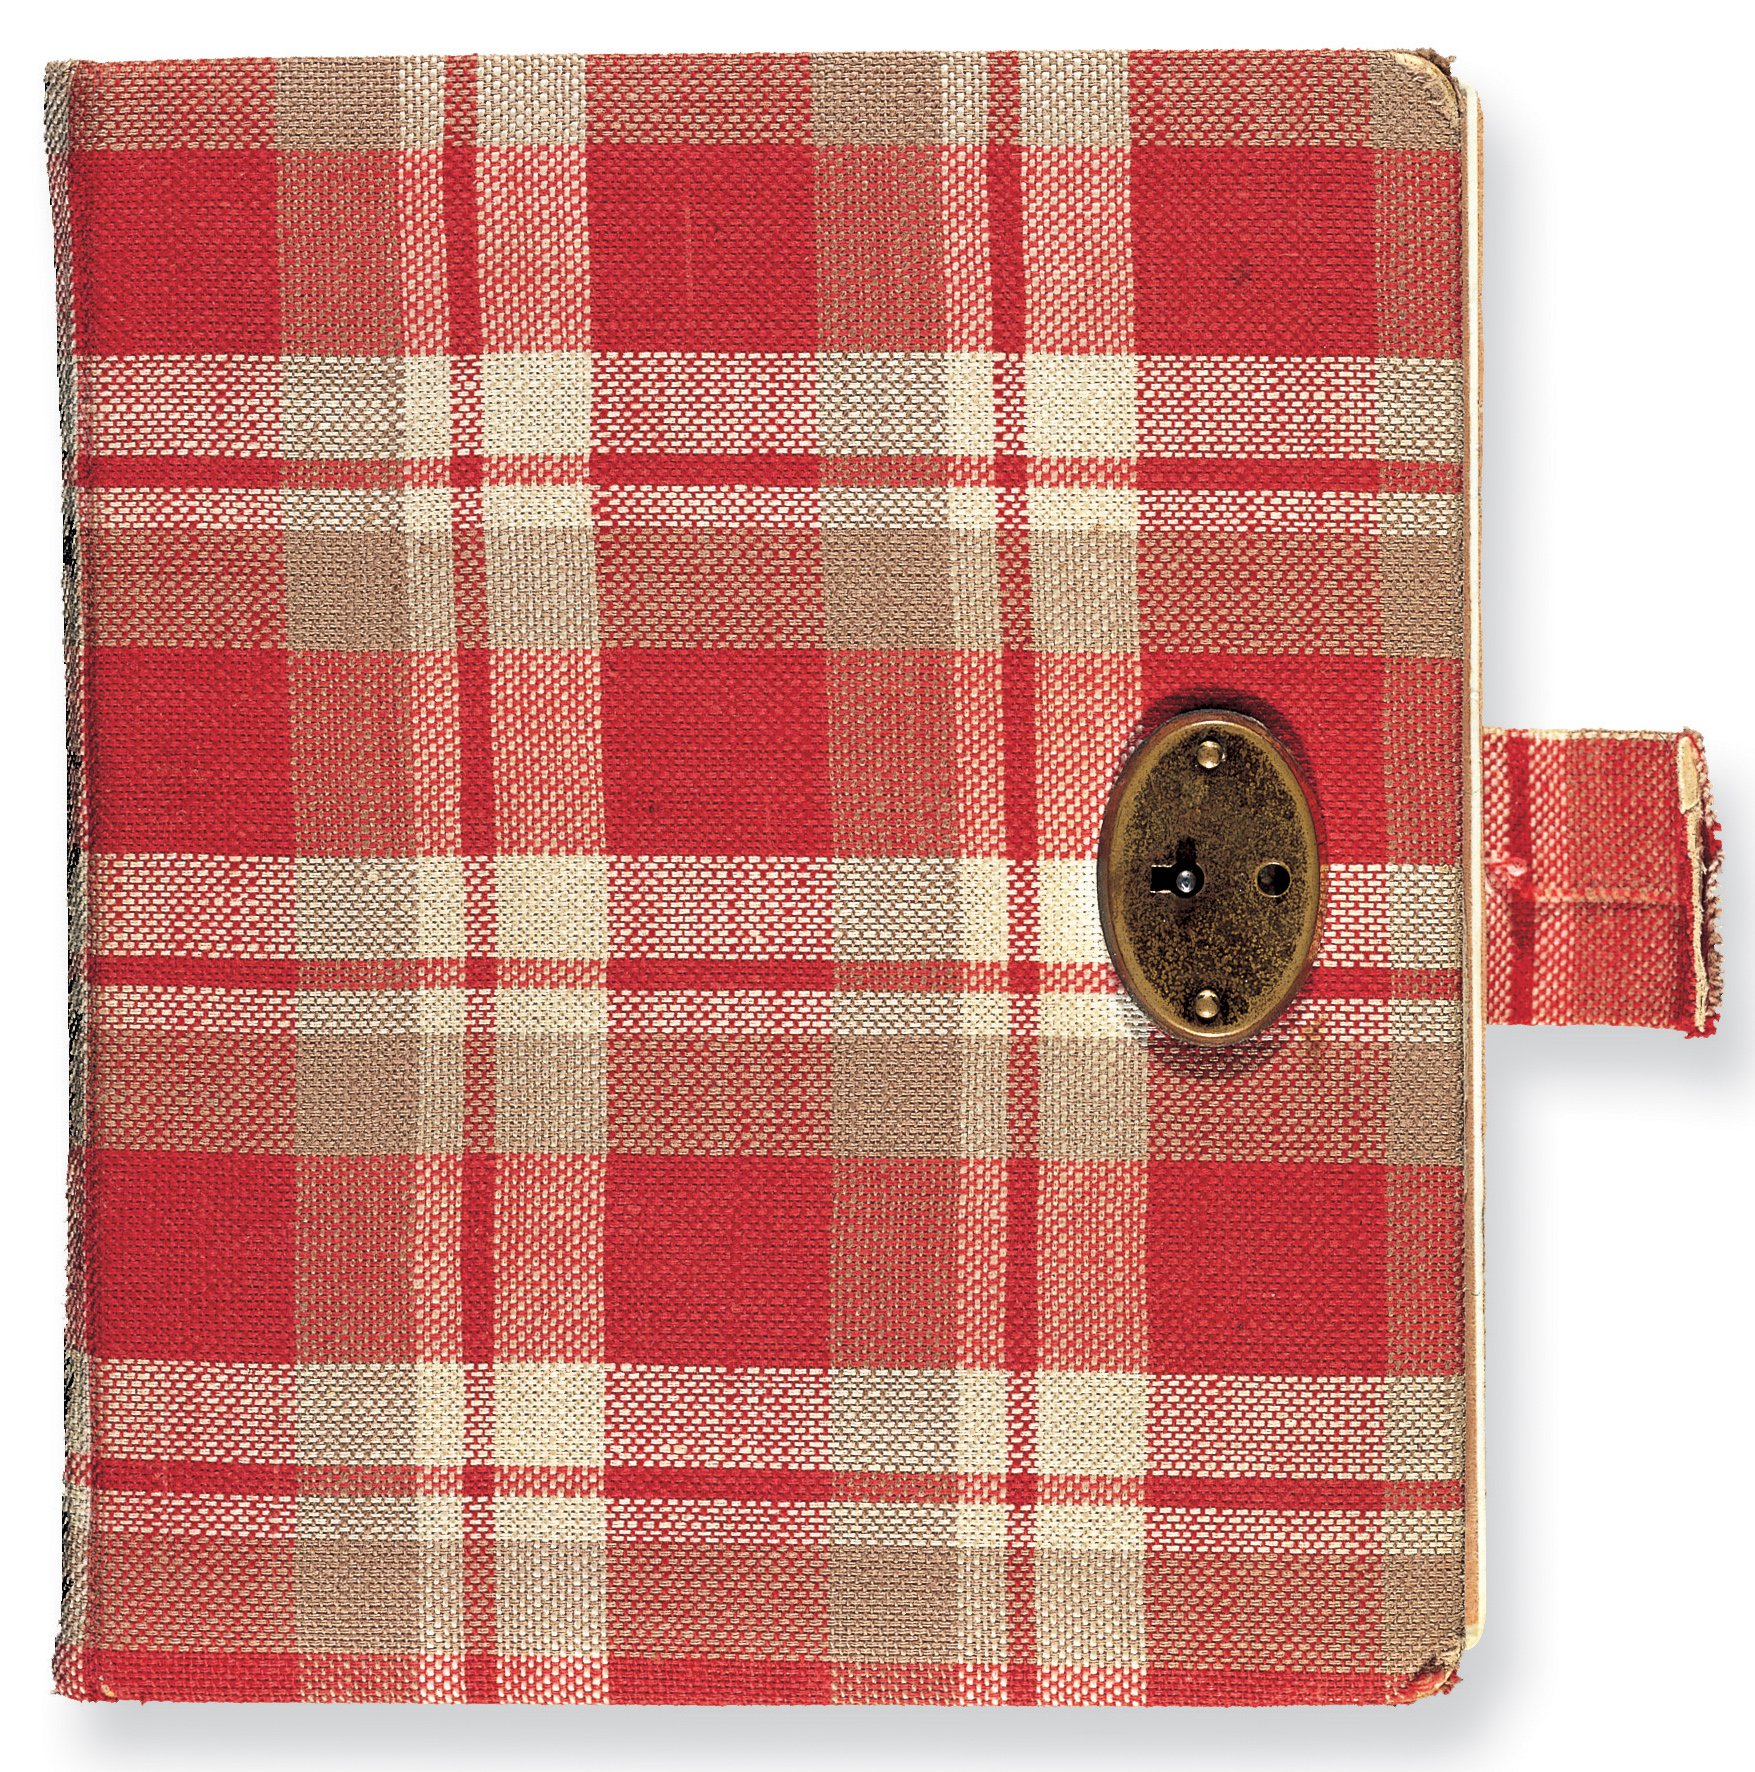 Anne Frank's red plaid diary